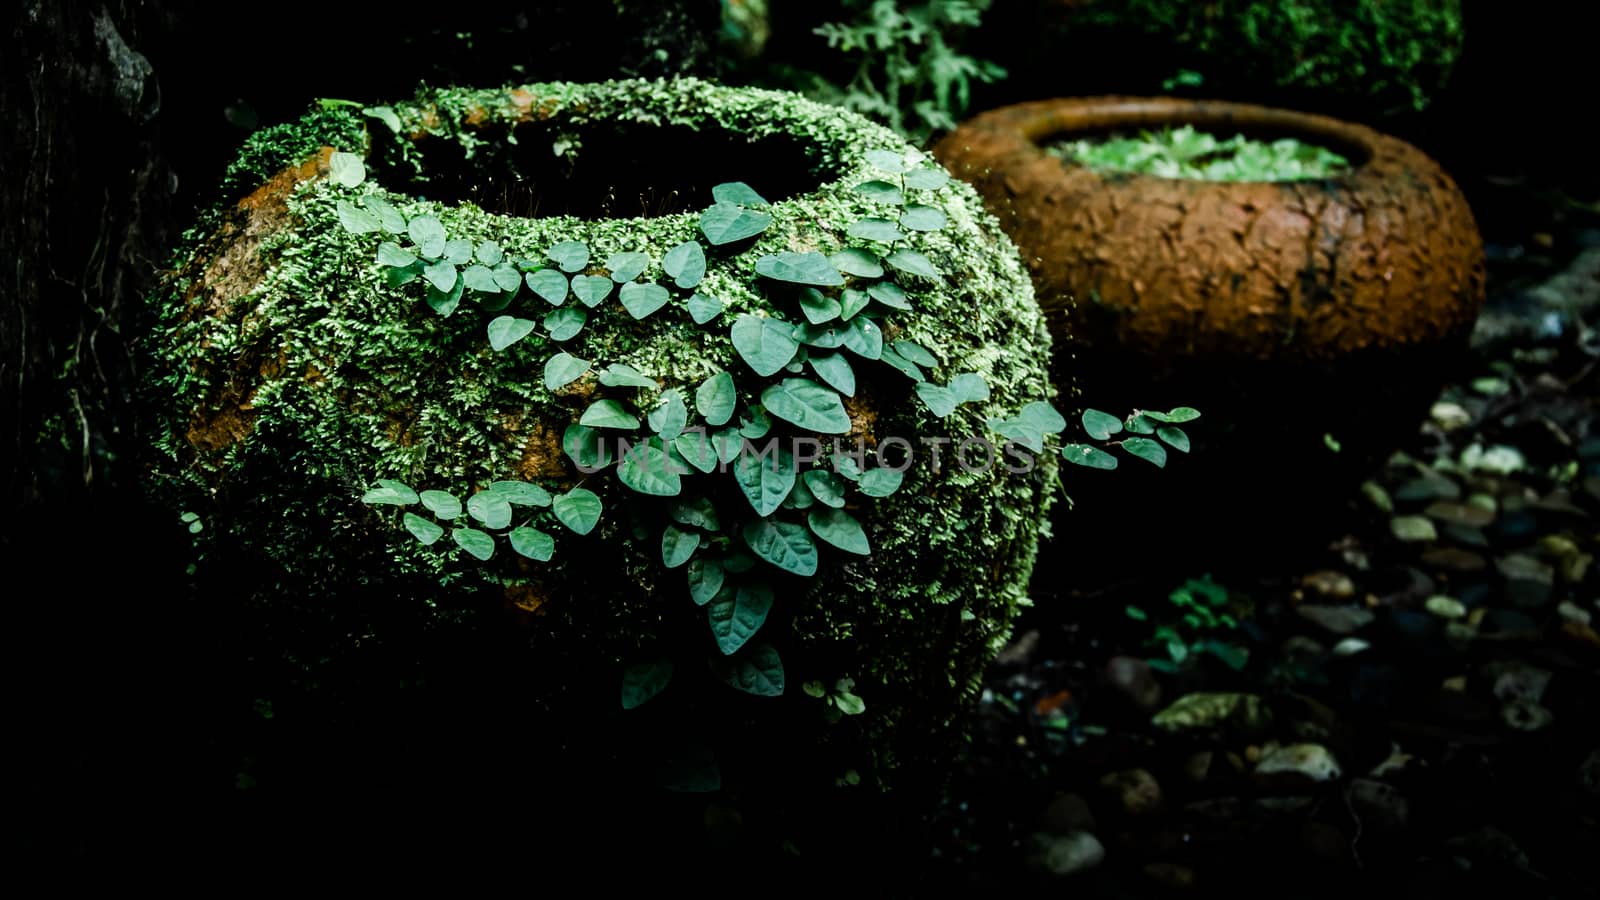 Fern and ivy on old earthenware jar, by pixbox77